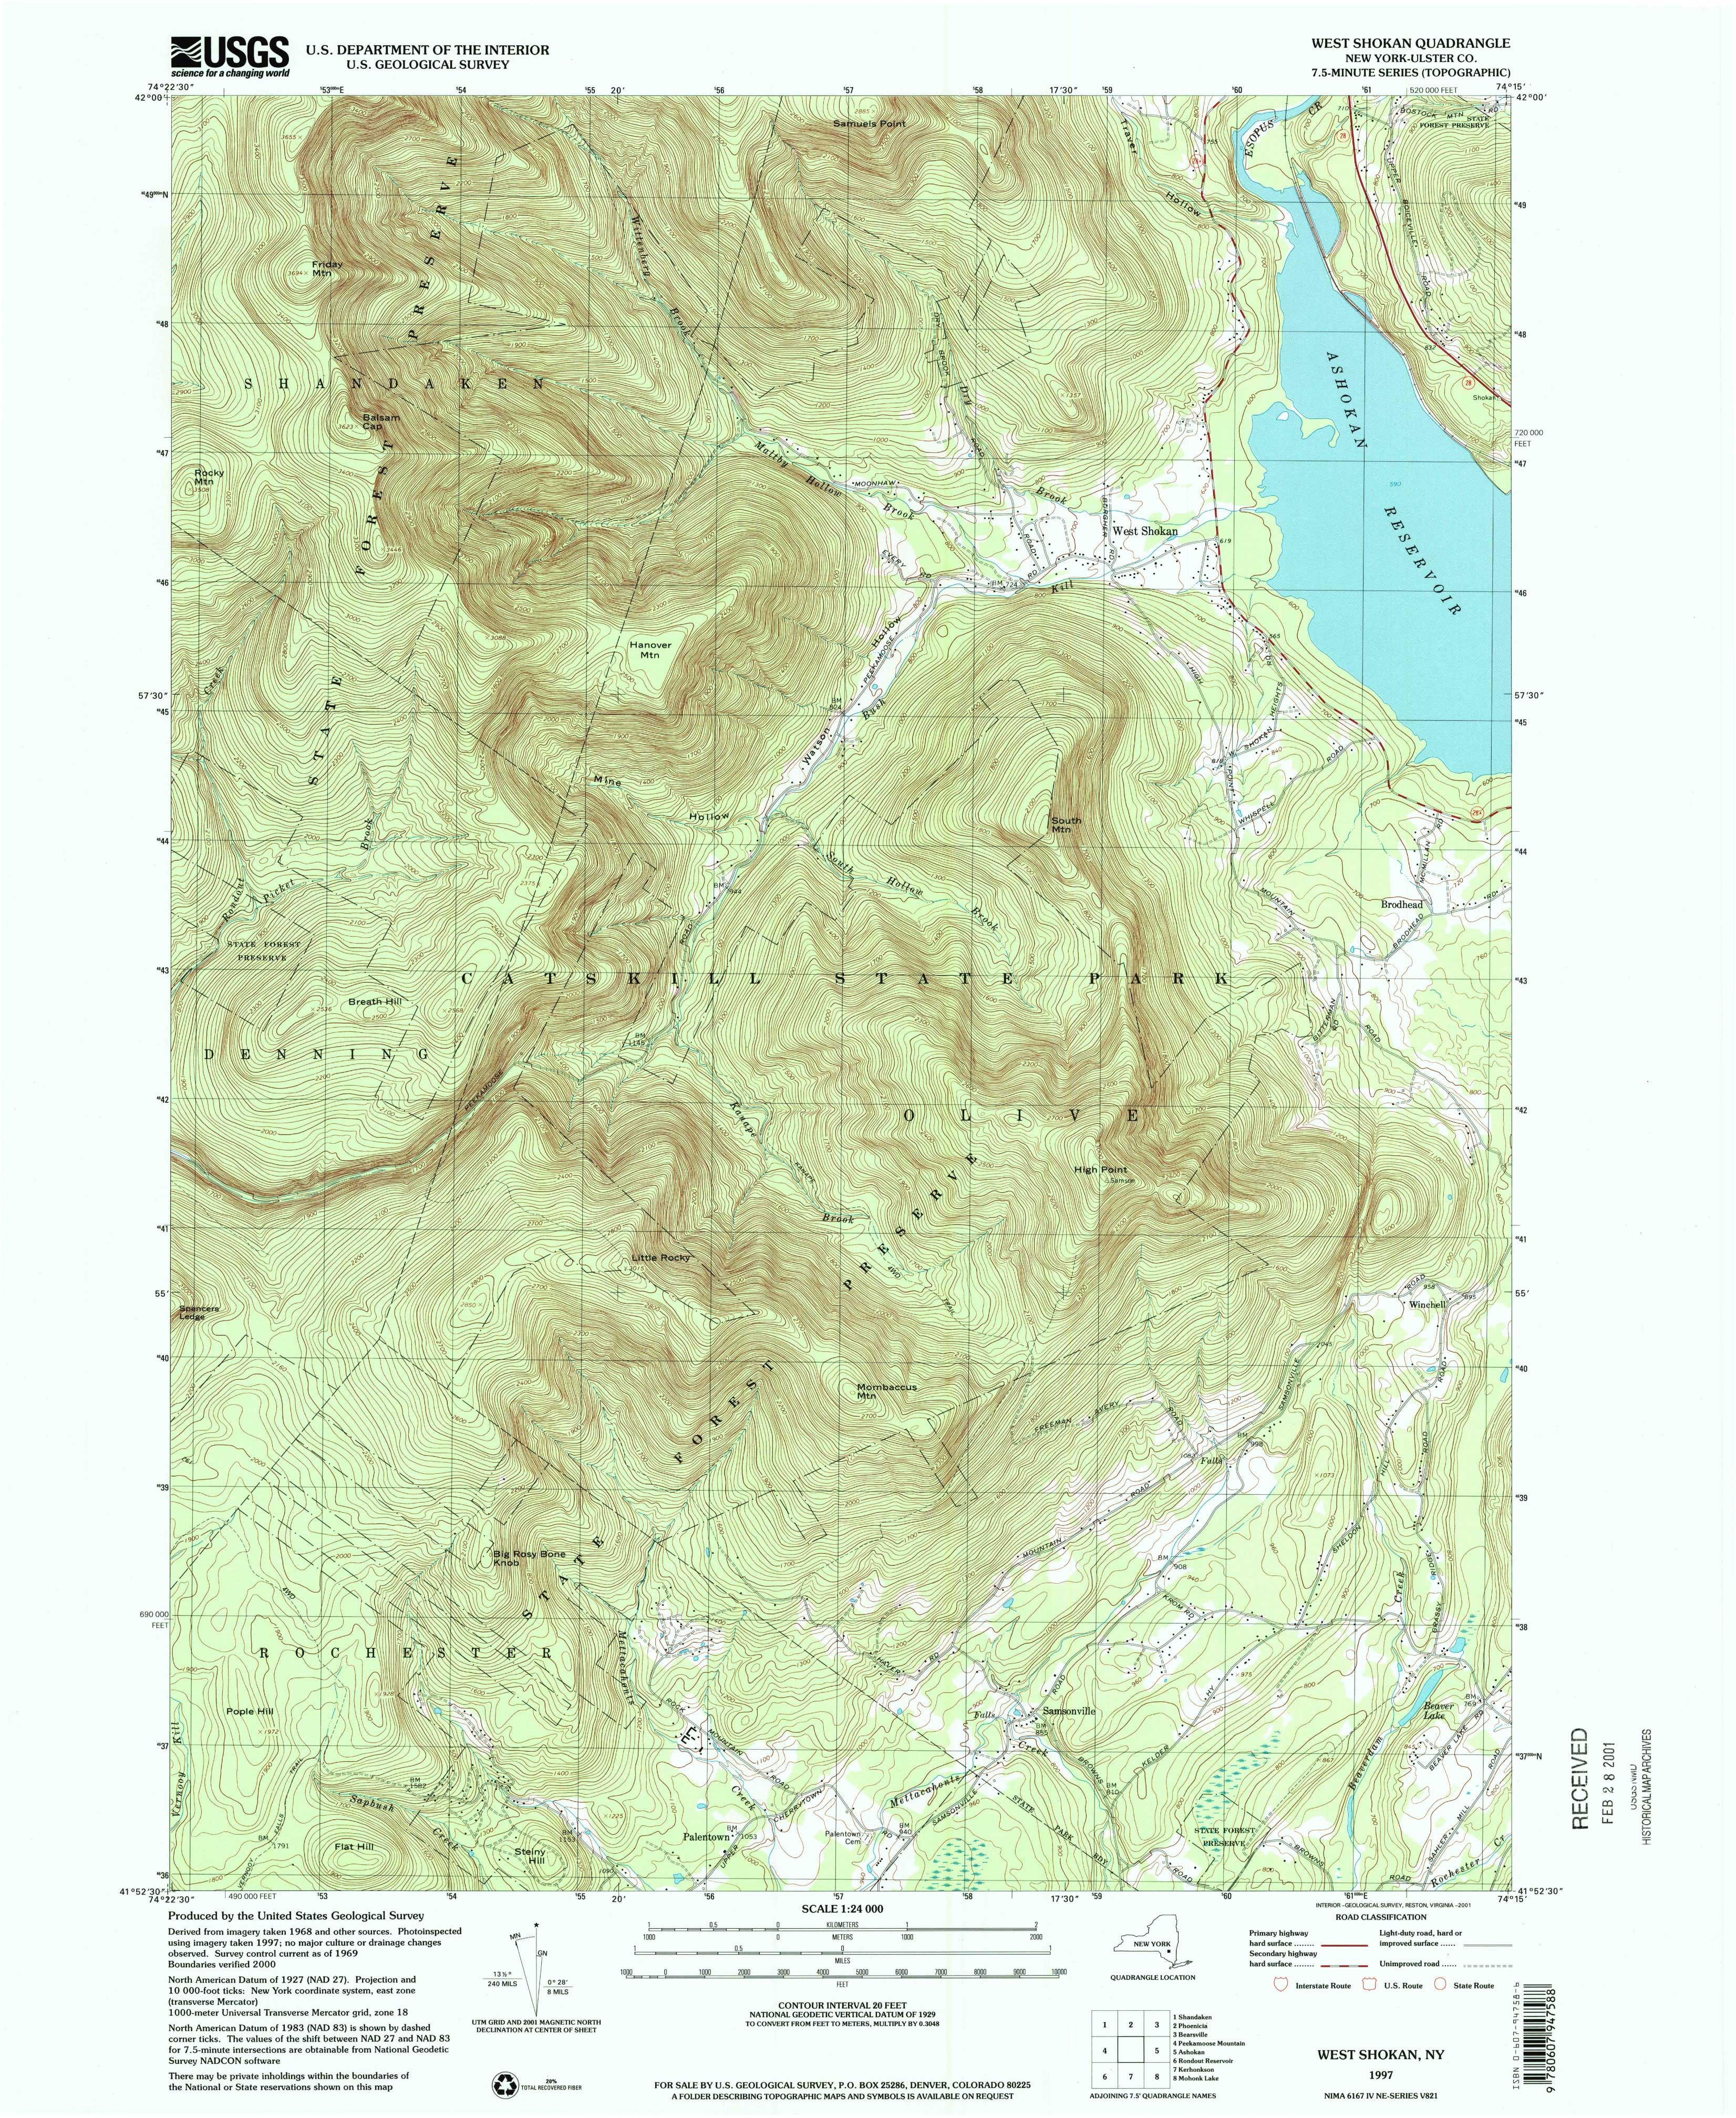 1997 USGS topographical map of West Shokan